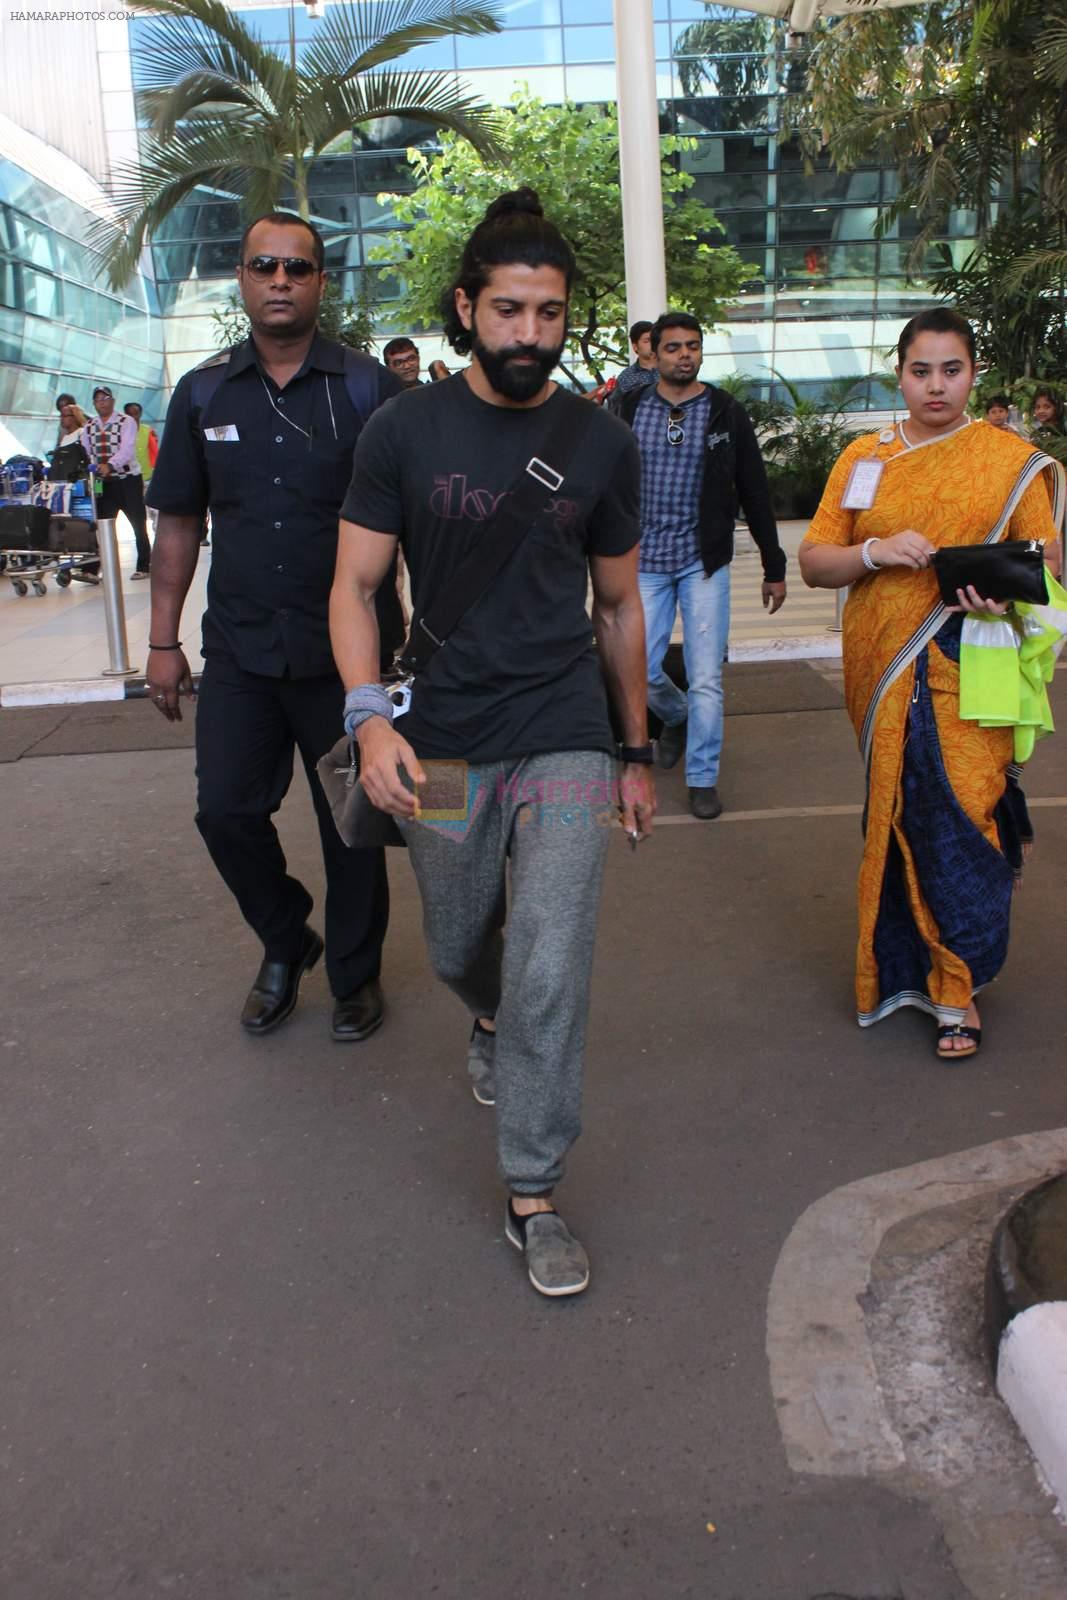 Farhan Akhtar snapped at Airport on 27th Dec 2015